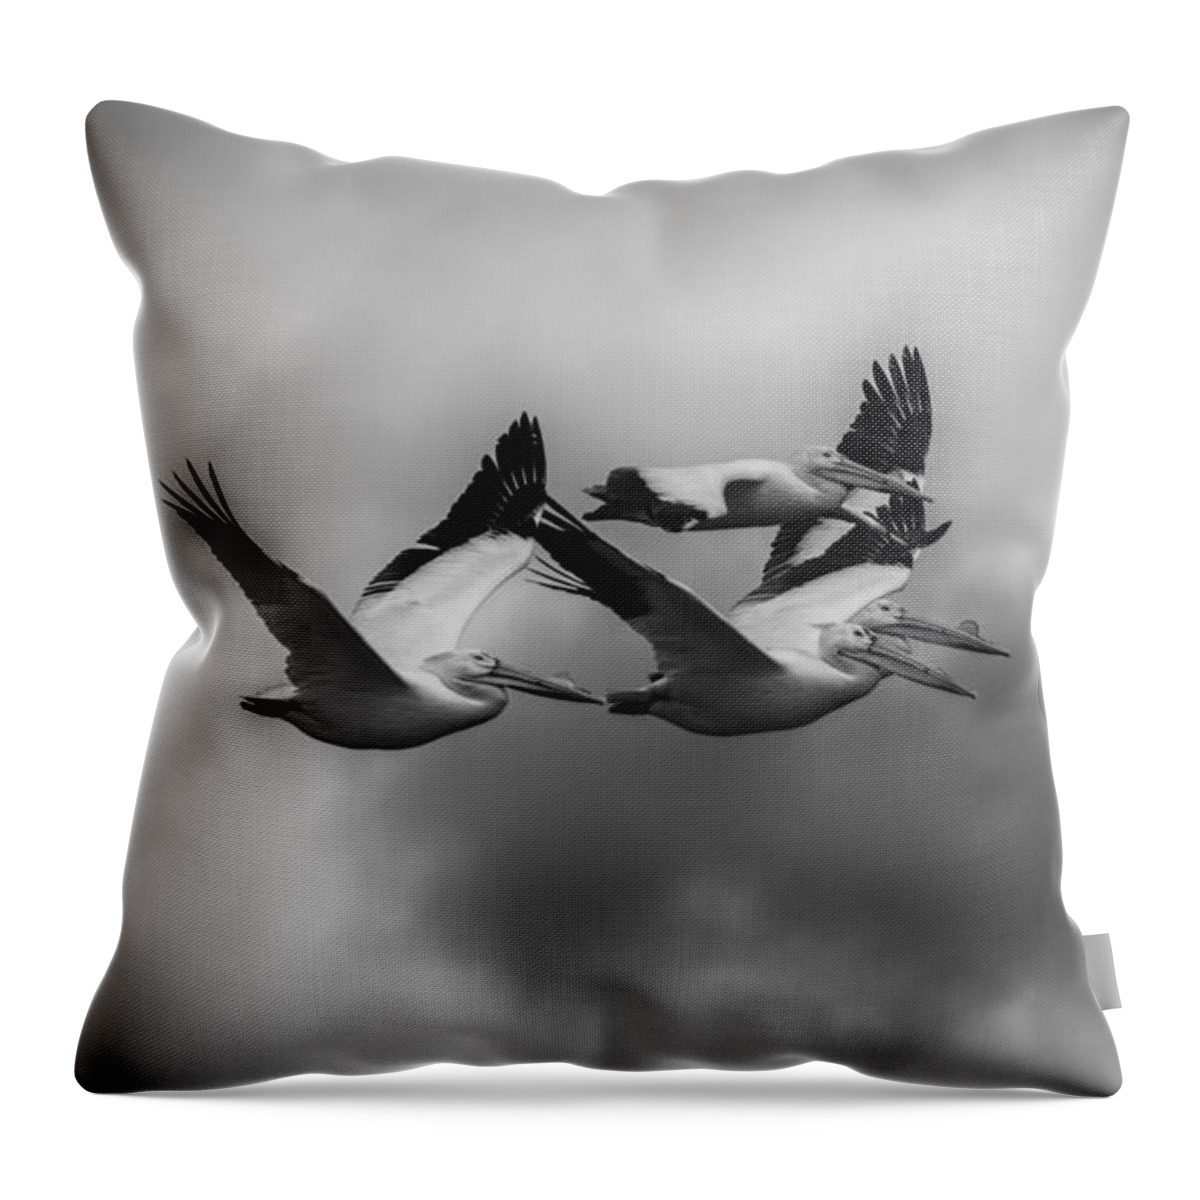 Flying White Pelicans Throw Pillow featuring the photograph Pelicans In Flight by Thomas Young